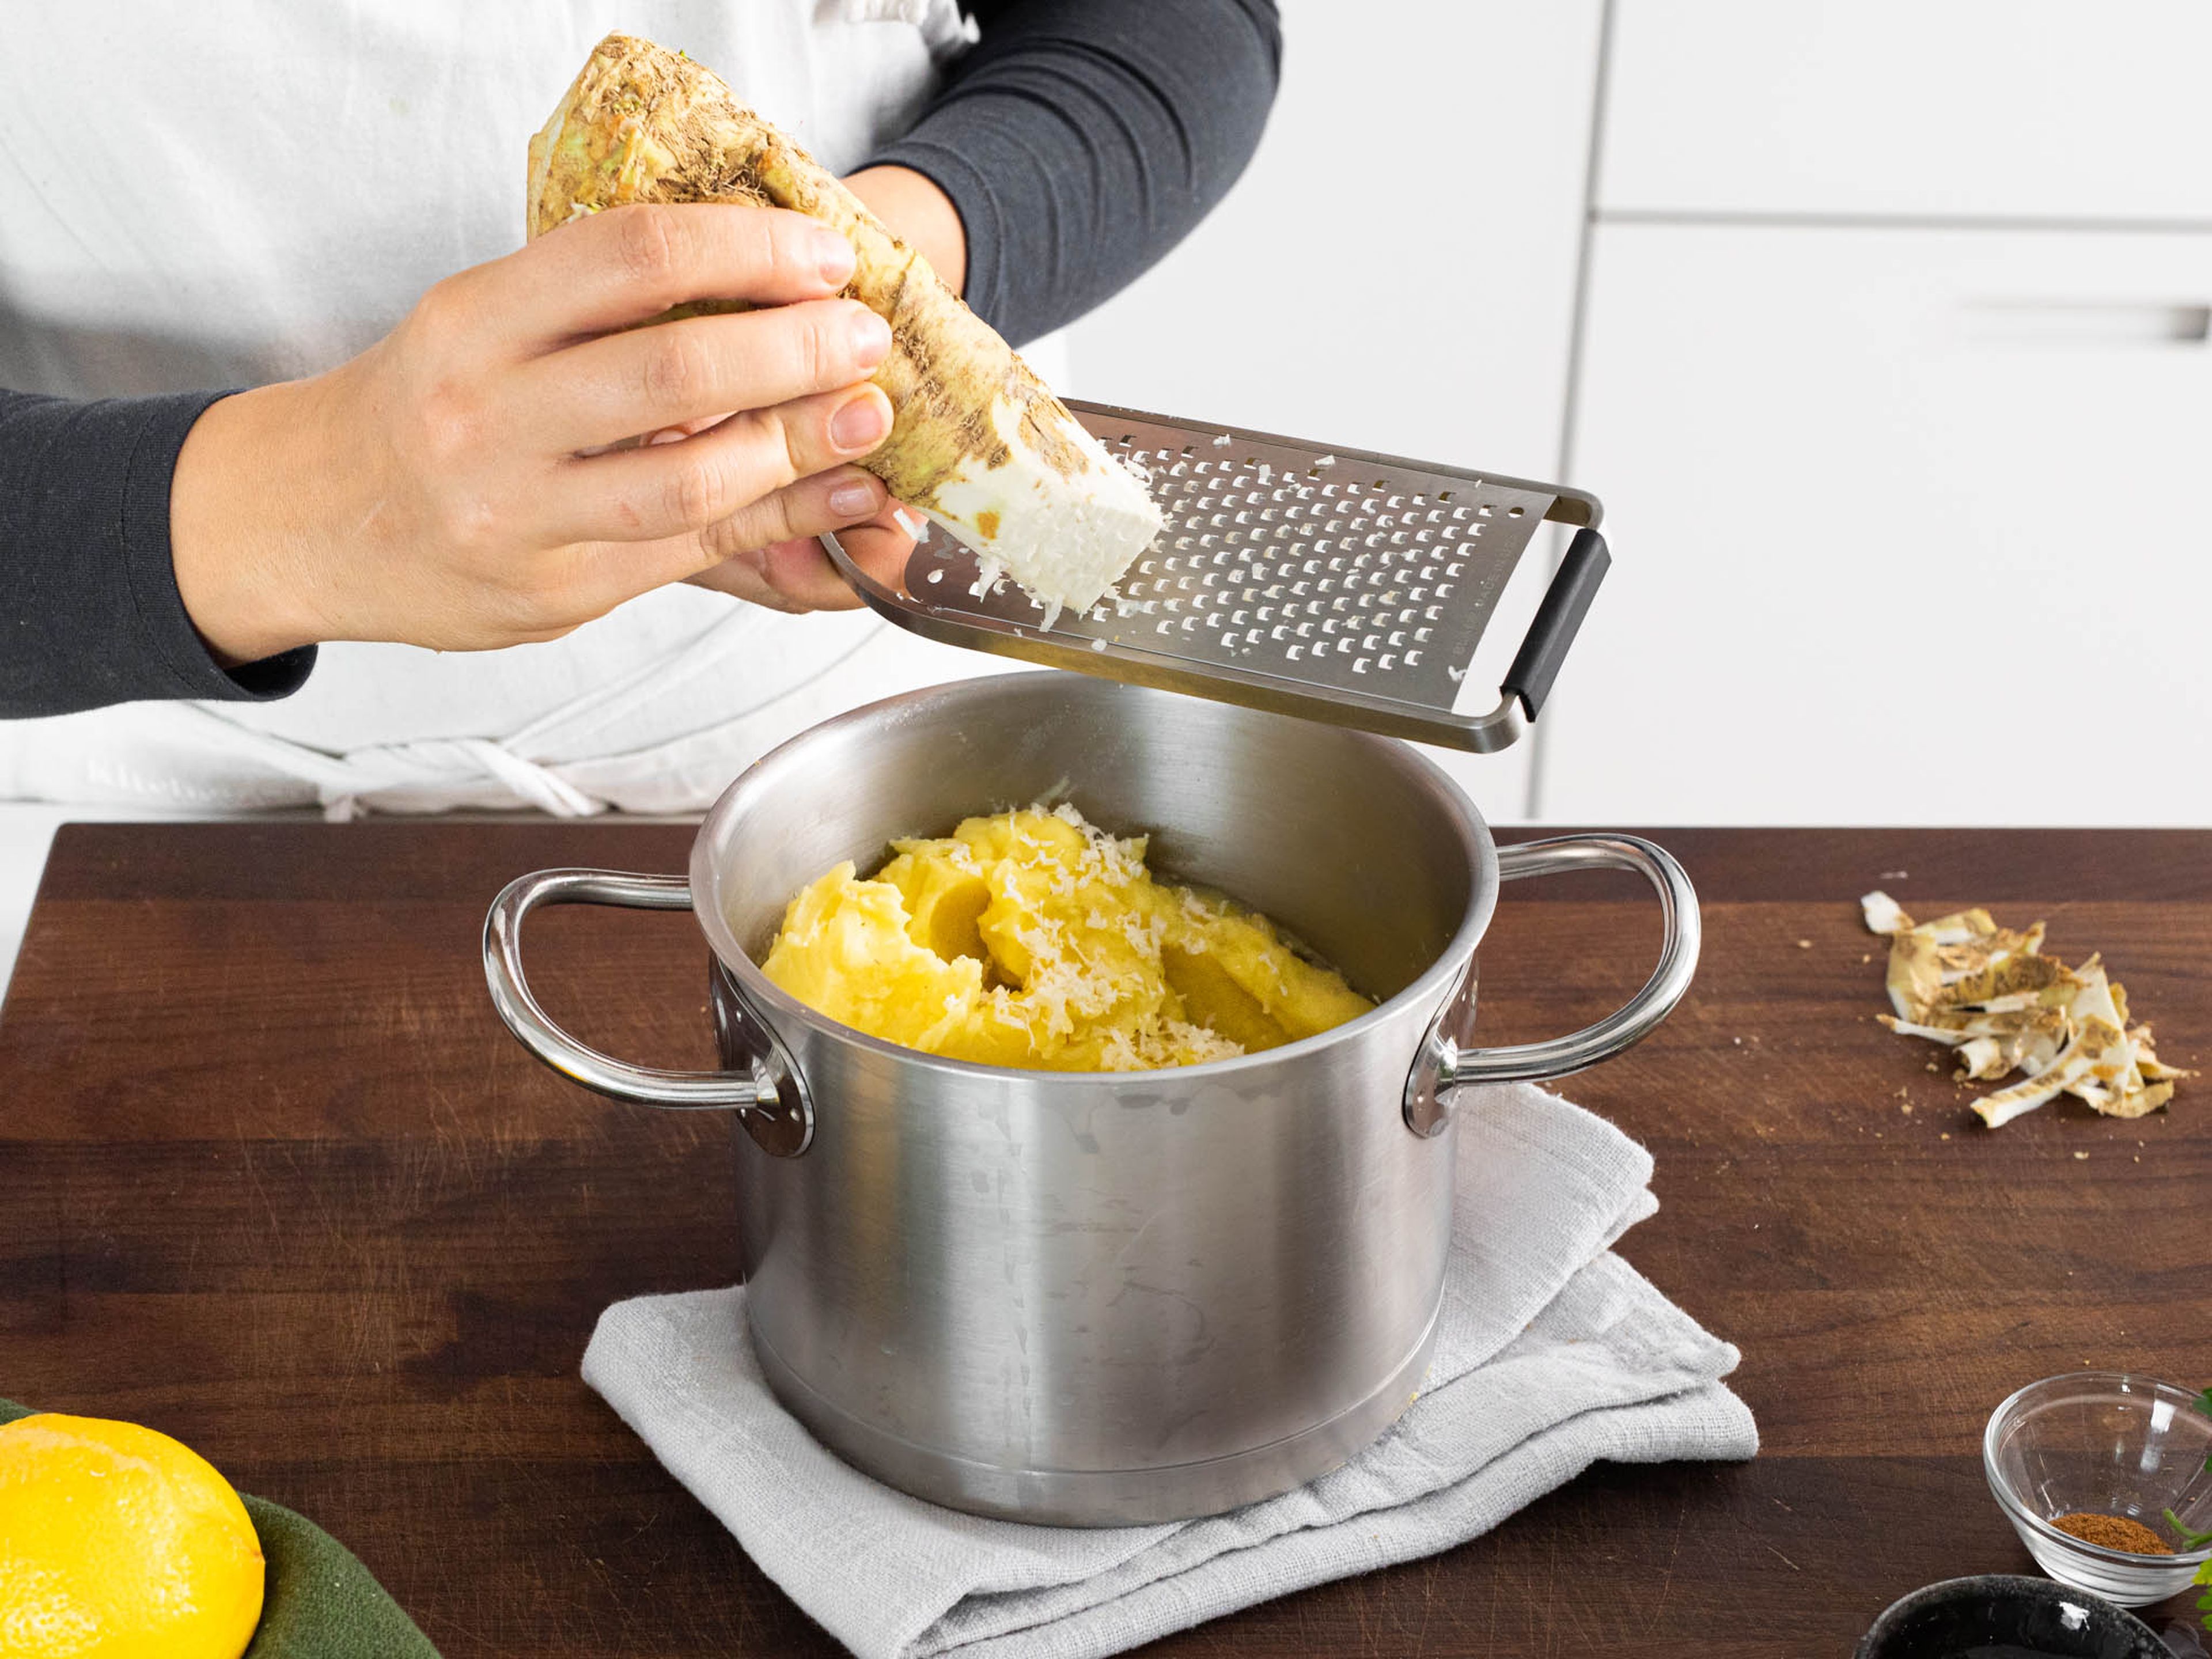 At the same time, use a potato ricer to mash cooked potatoes. Heat remaining butter and milk, nutmeg, and salt in a small saucepan, then stir in with the mash. Grate some horseradish over it.